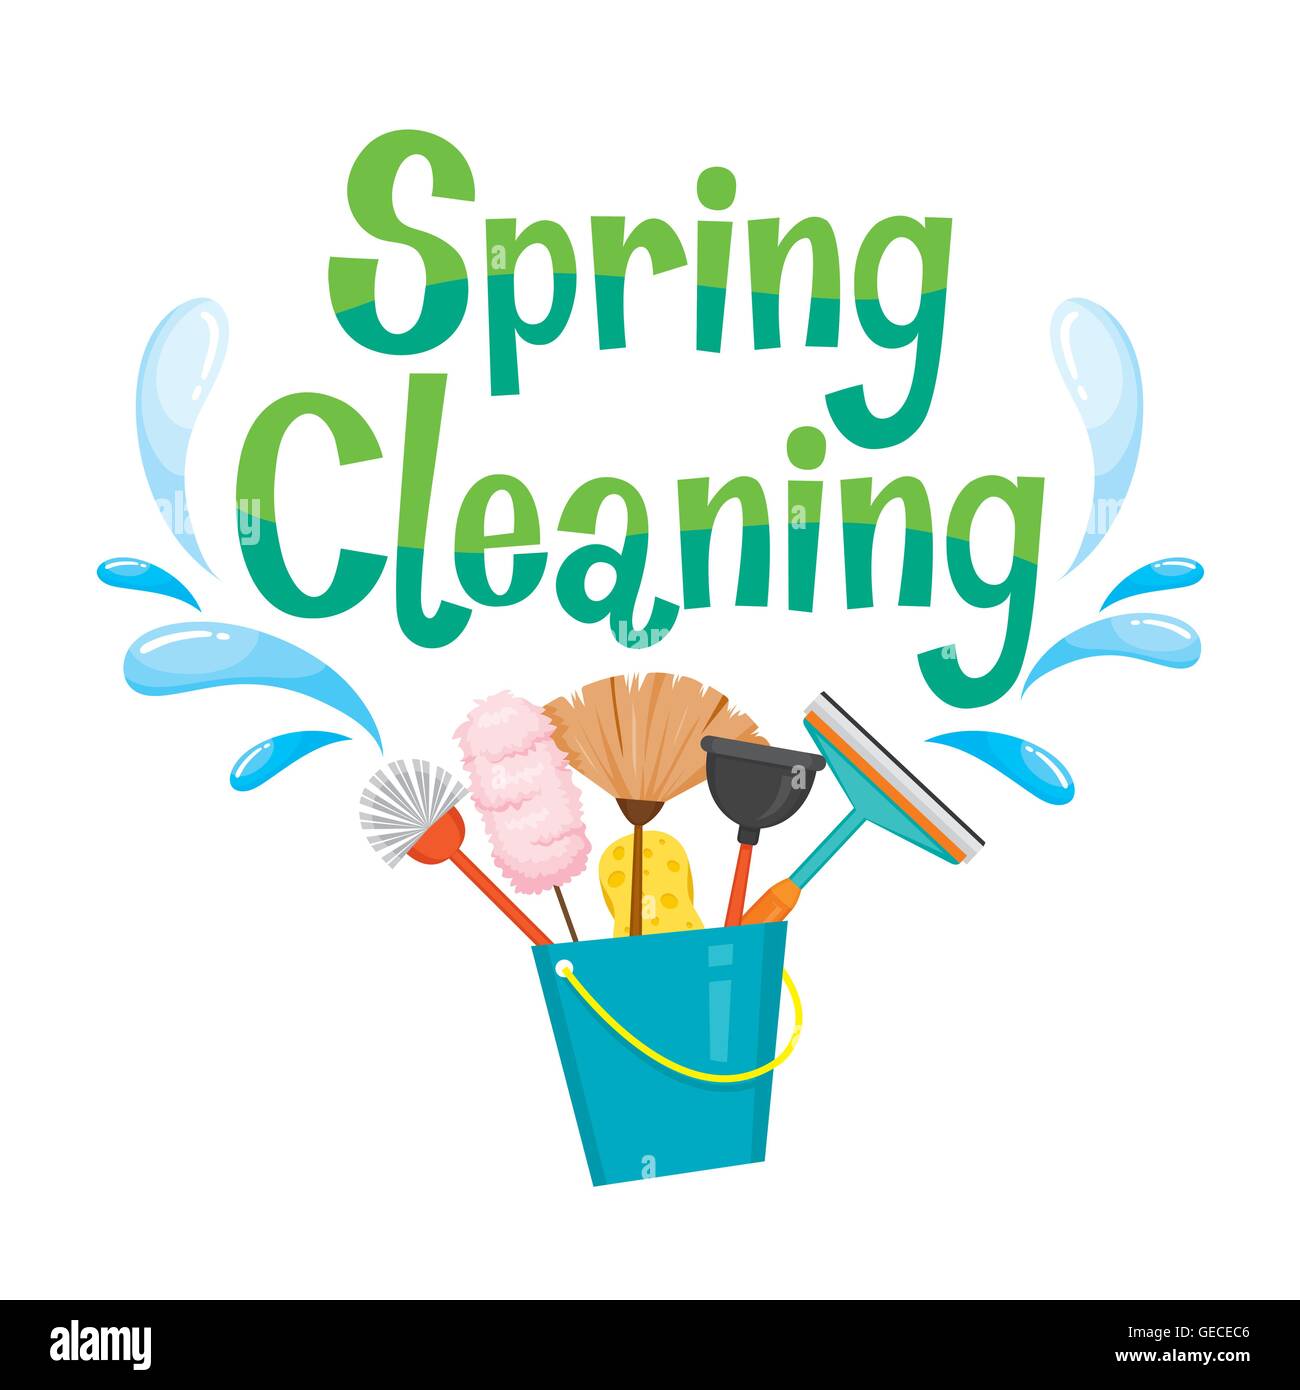 free spring cleaning clipart